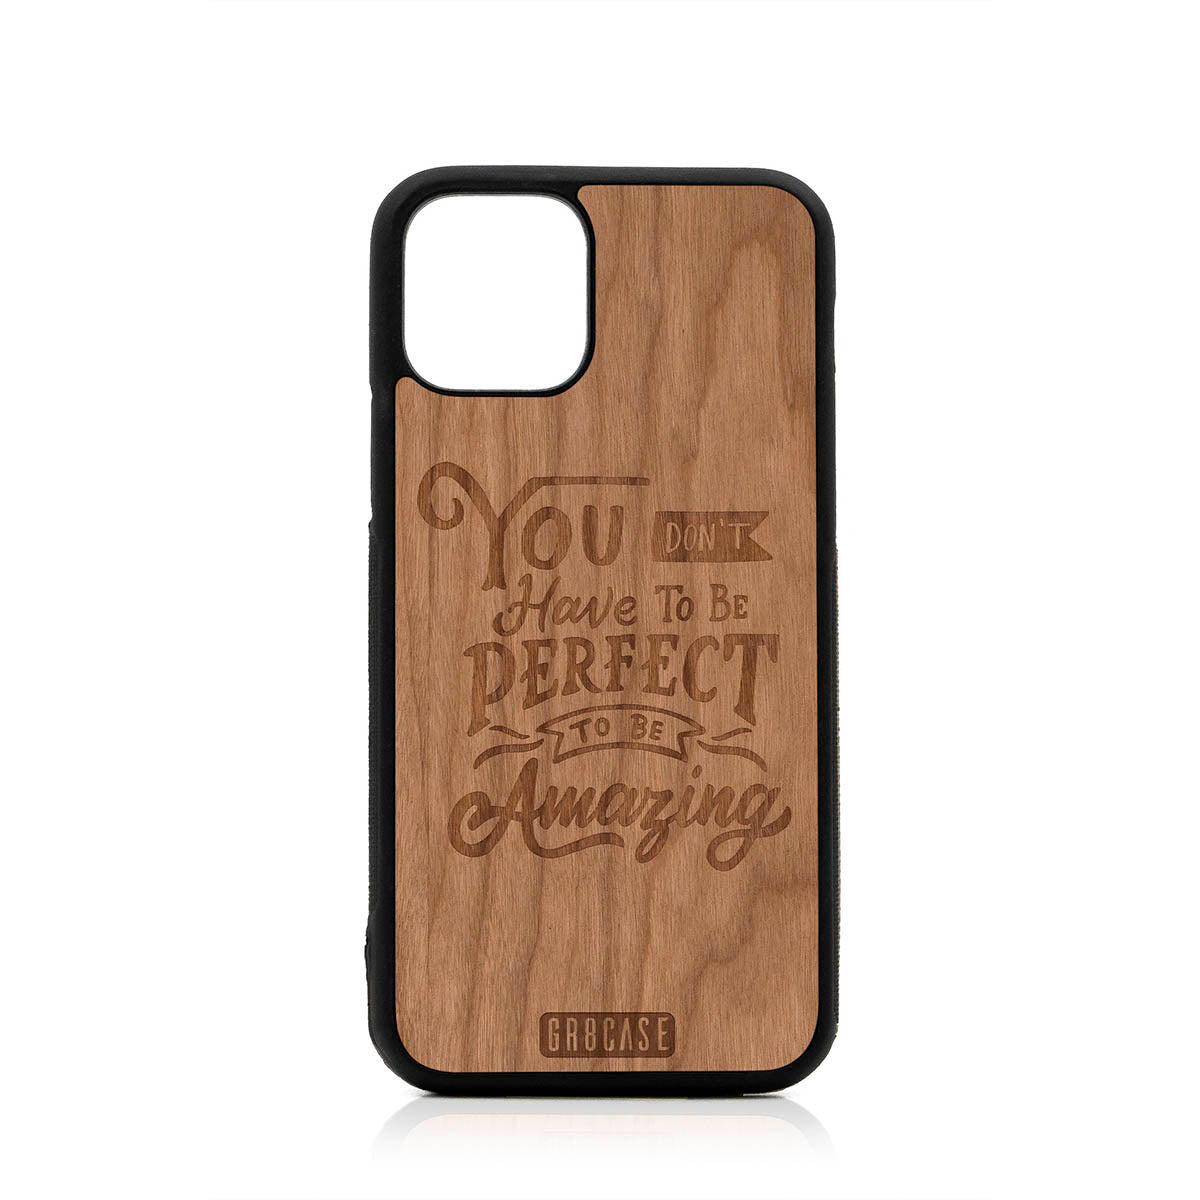 You Don't Have To Be Perfect To Be Amazing Design Wood Case For iPhone 11 Pro